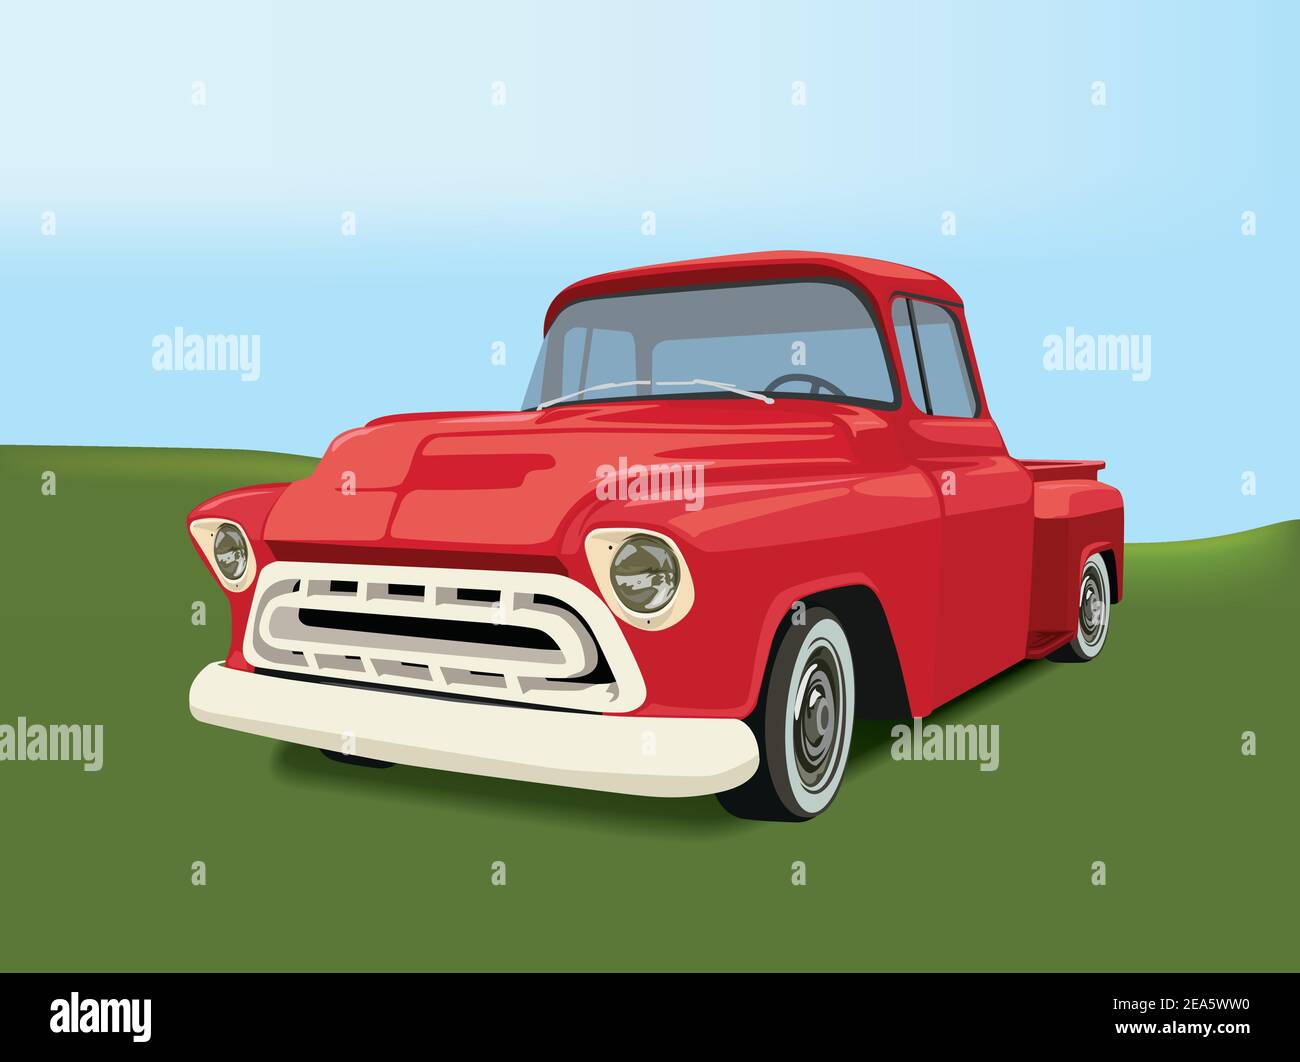 Vintage Truck on illustration graphic vector Stock Vector